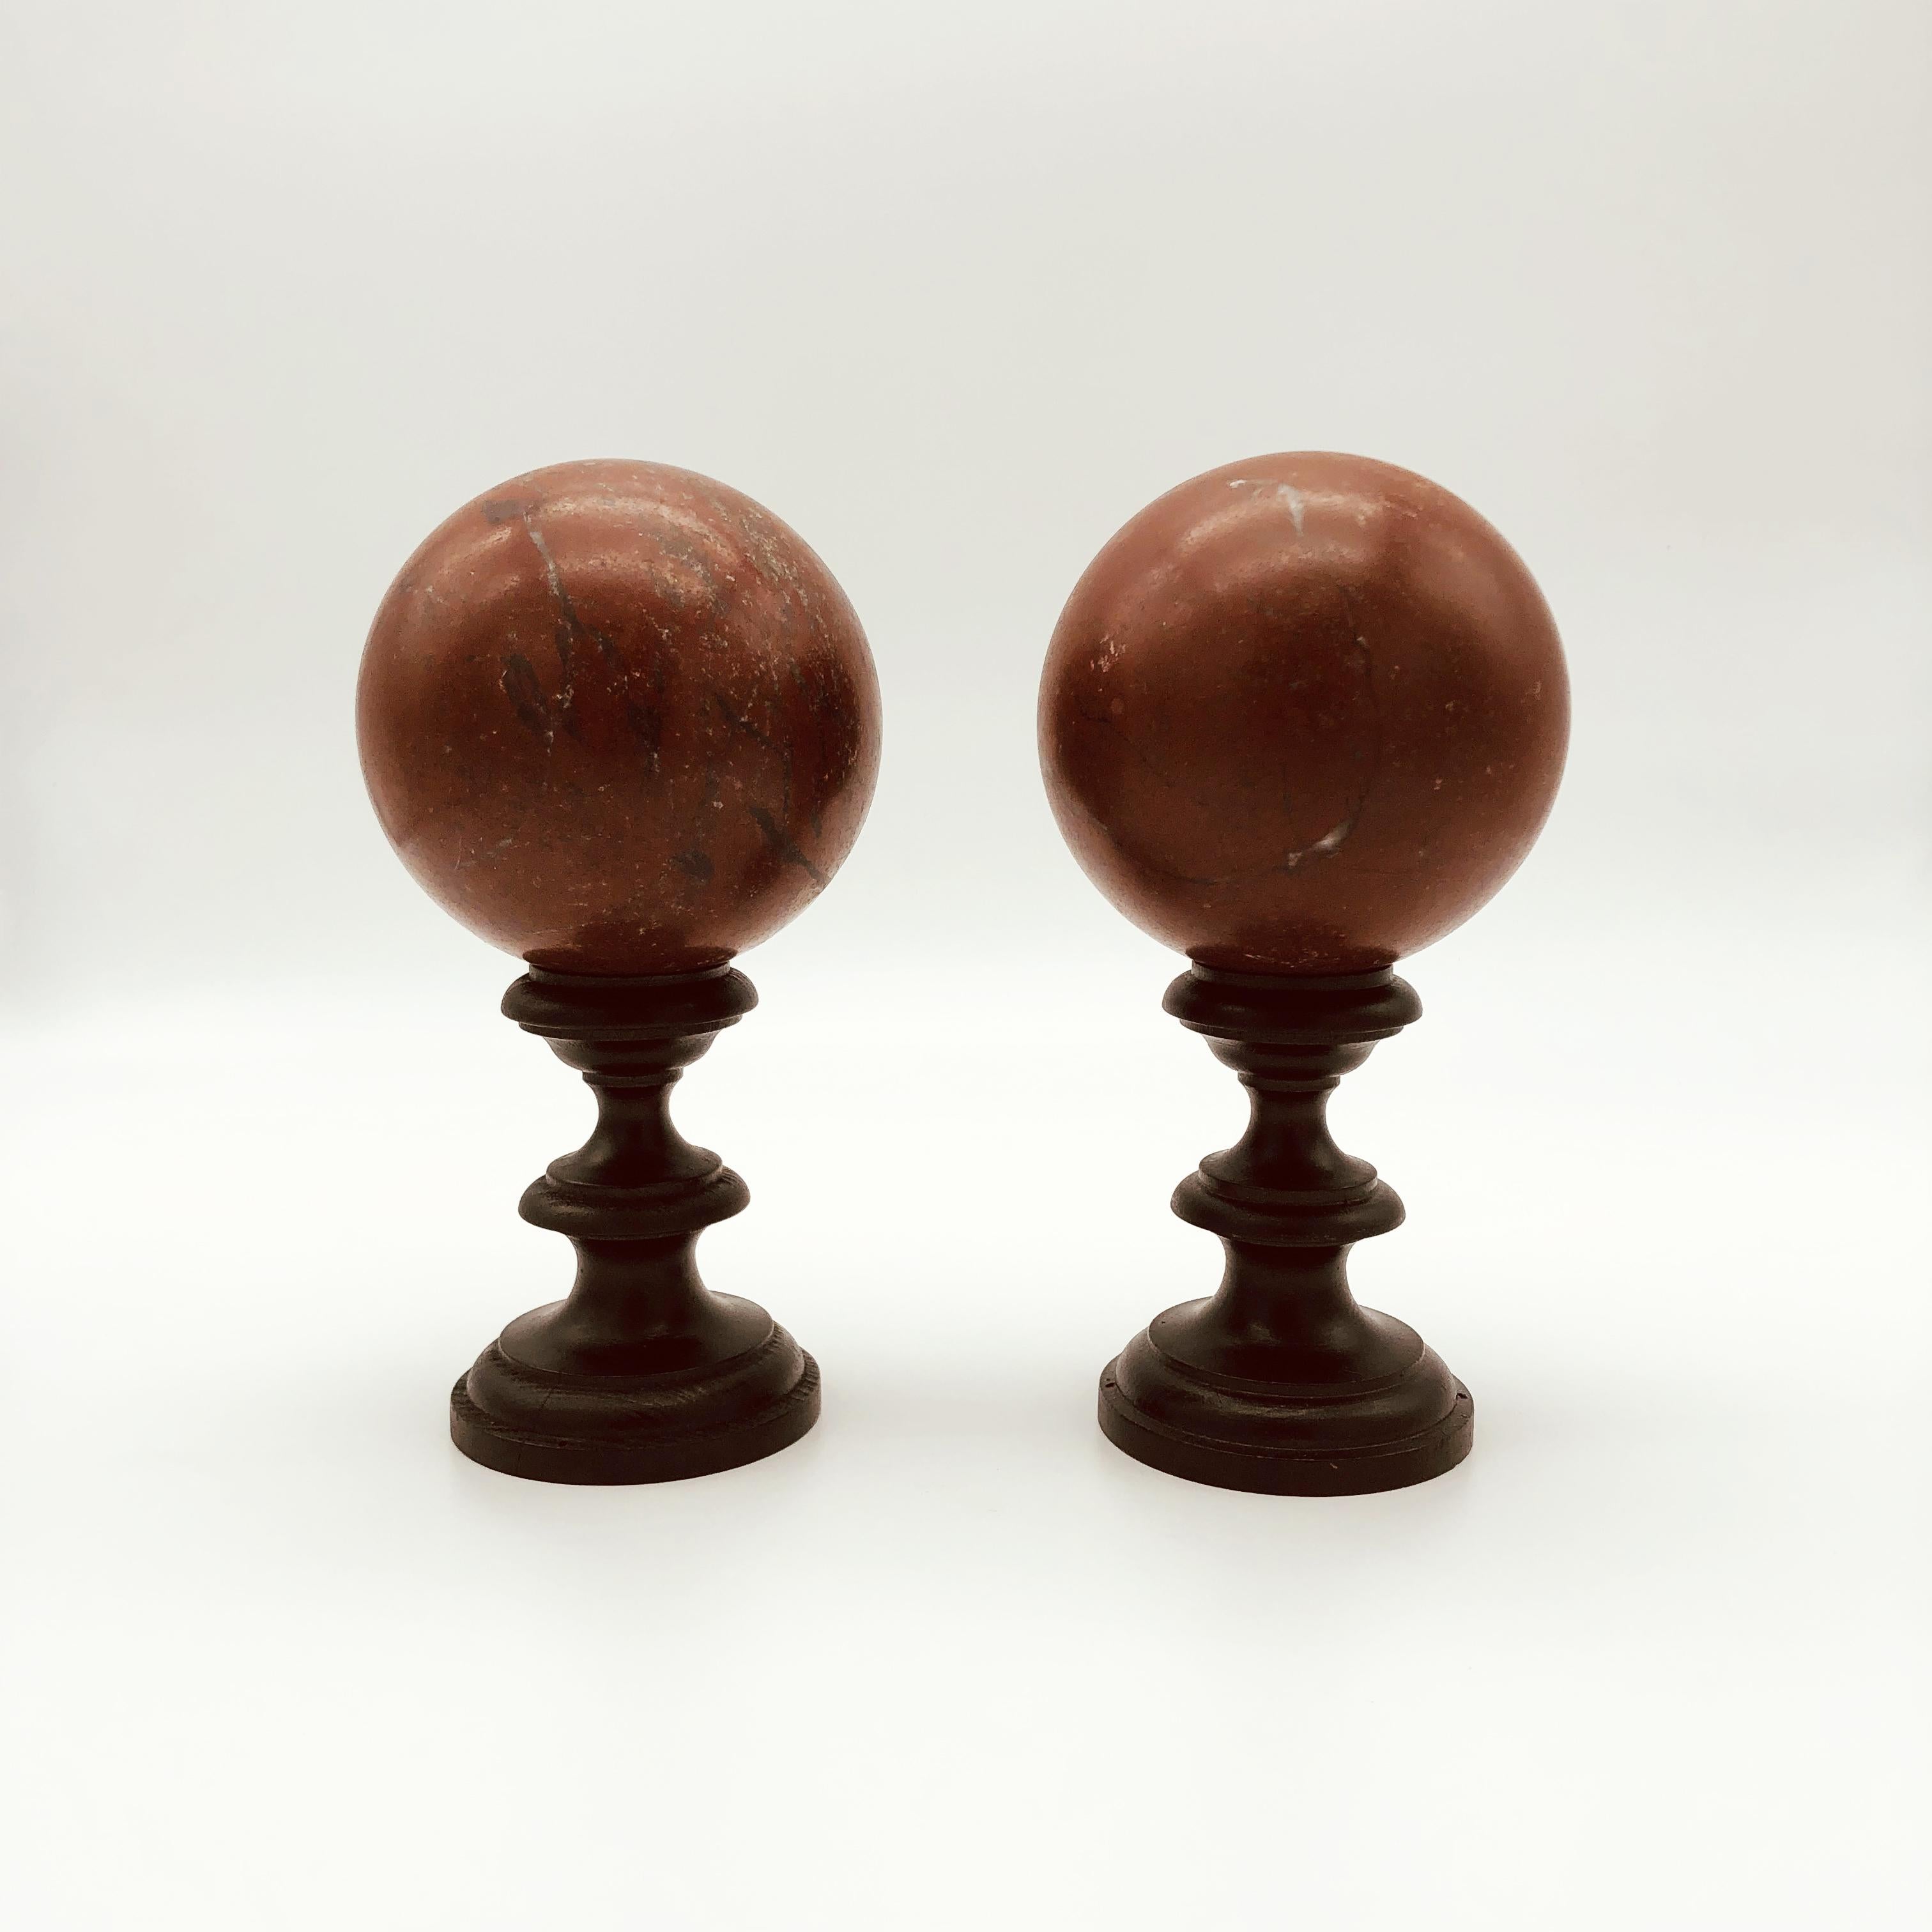 20th Century Italian Pair of Red Griotte Marble Sculpture Grand Tour Balls 2